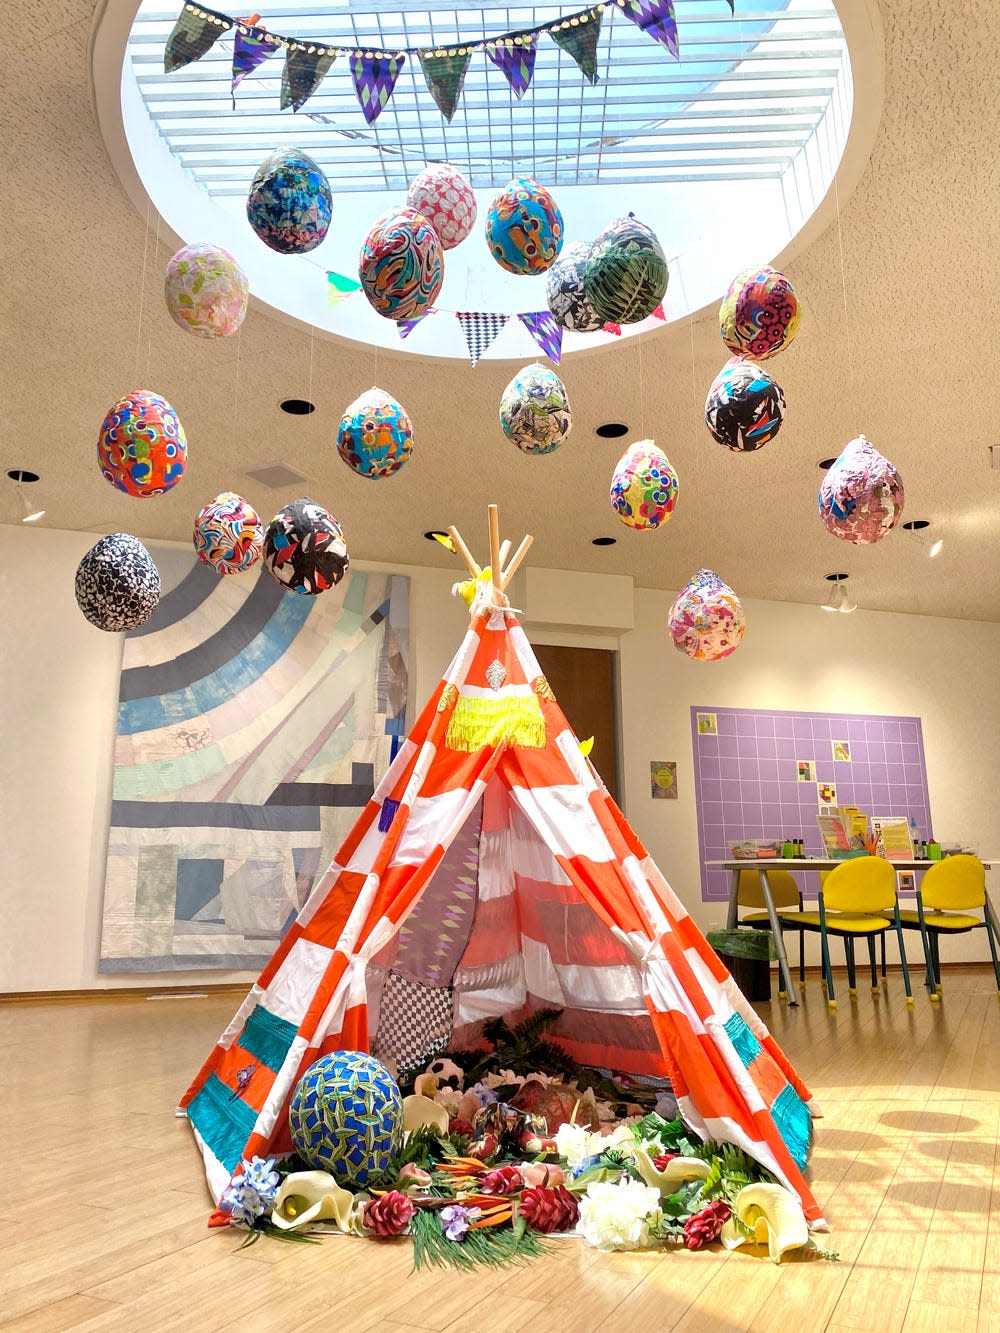 Ebony G. Patterson's piece "…just a baby…(…when they grow up…)" includes the handmade tent, fabric balloons and banner in the “moniquemeloche presents…" exhibit at the Lubeznik Center for the Arts in Michigan City.